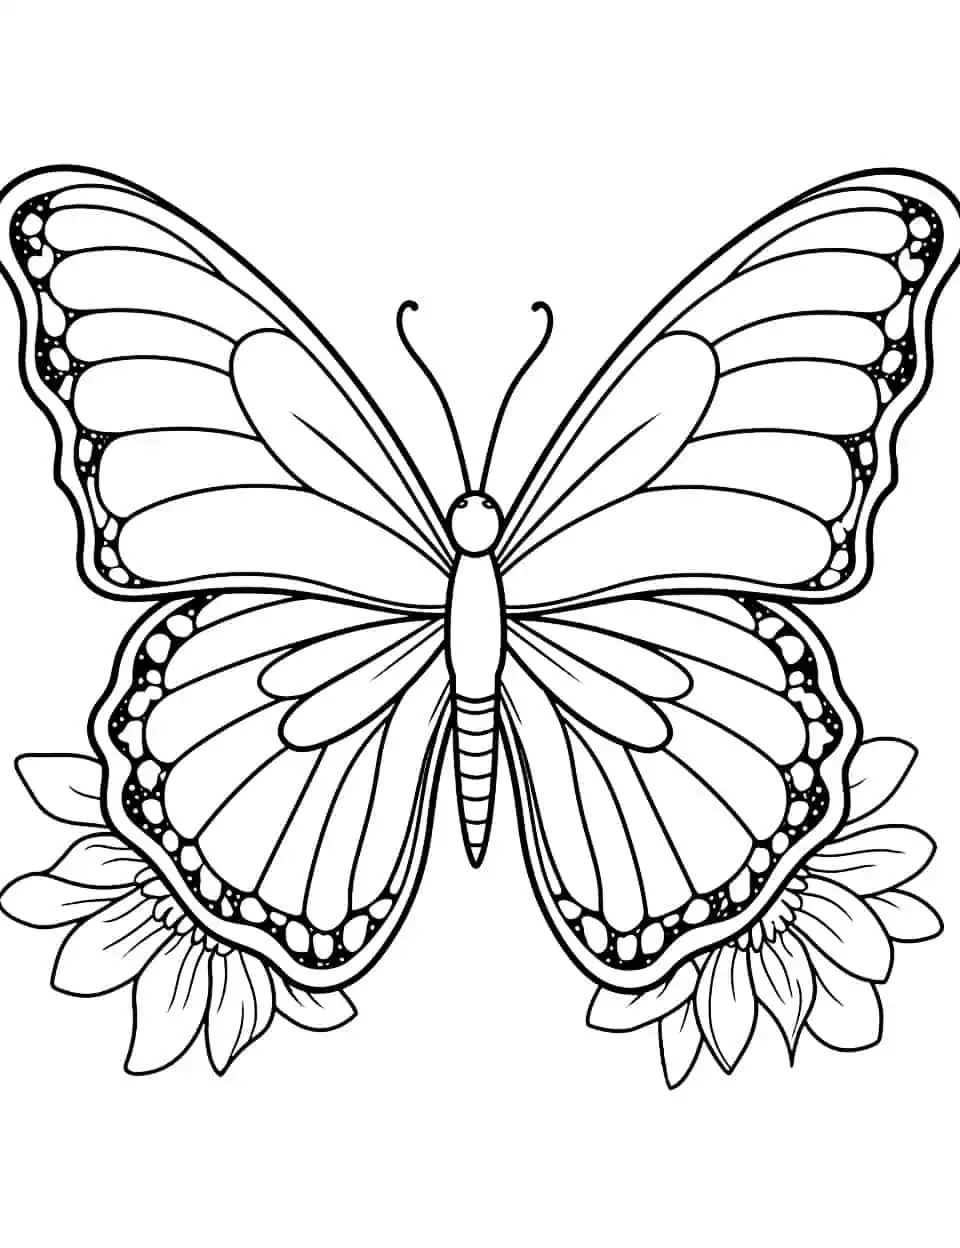 Monarch Majesty Butterfly Coloring Page - A detailed coloring page featuring a realistic monarch butterfly perched on a vibrant flower.